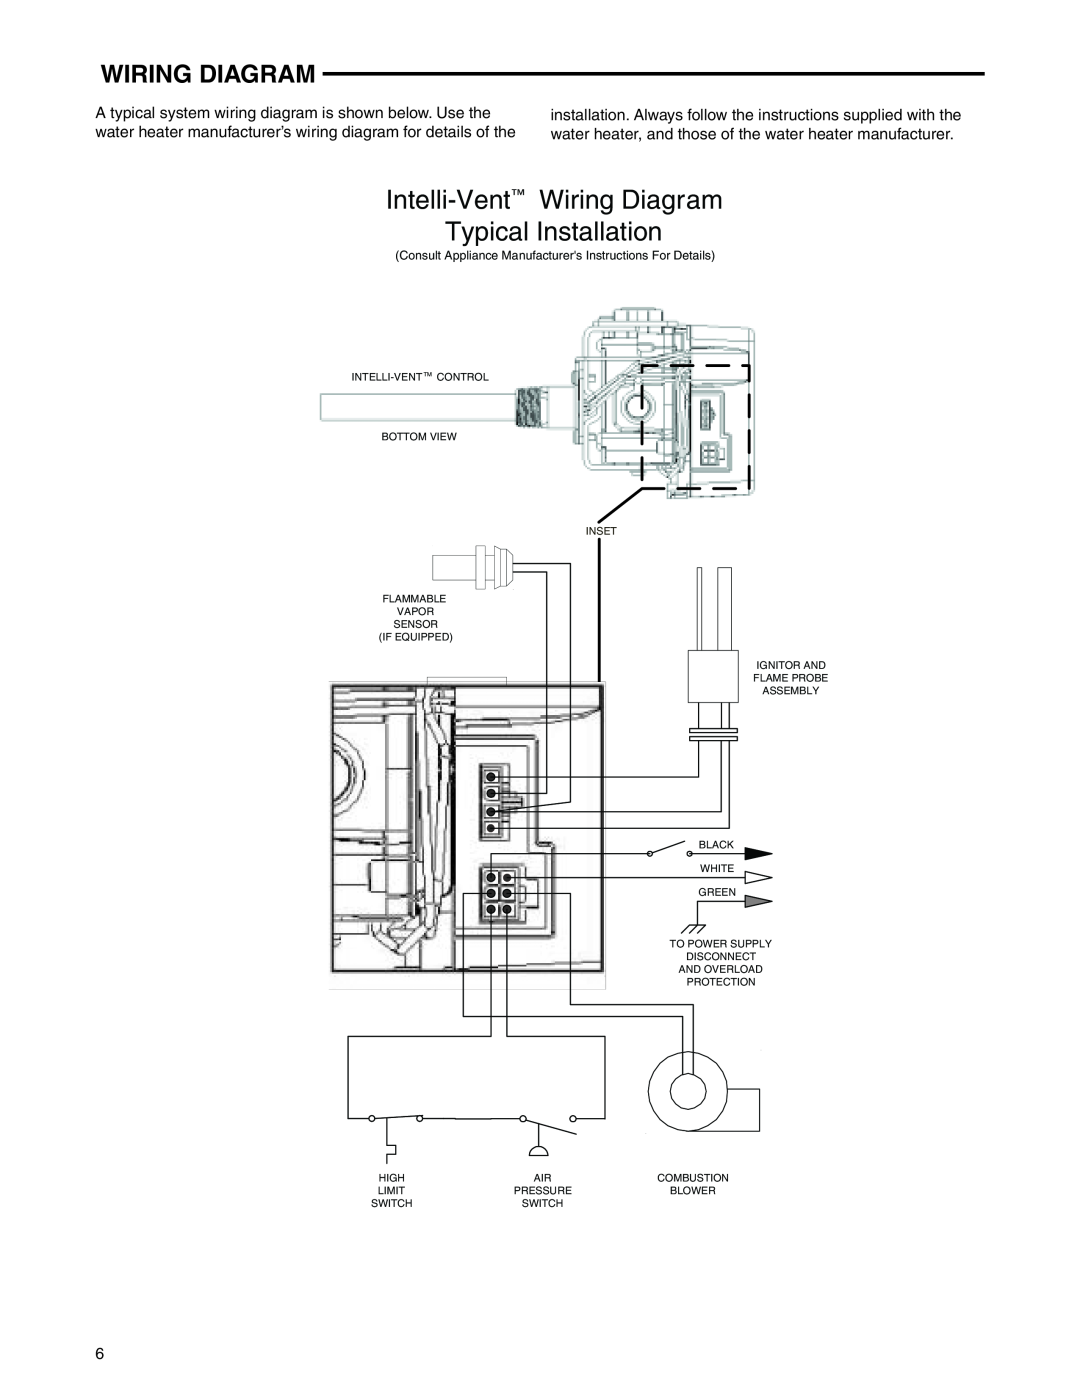 White Rodgers 921, 927, 922, 37E73A-918 installation instructions Intelli-Vent Wiring Diagram Typical Installation 